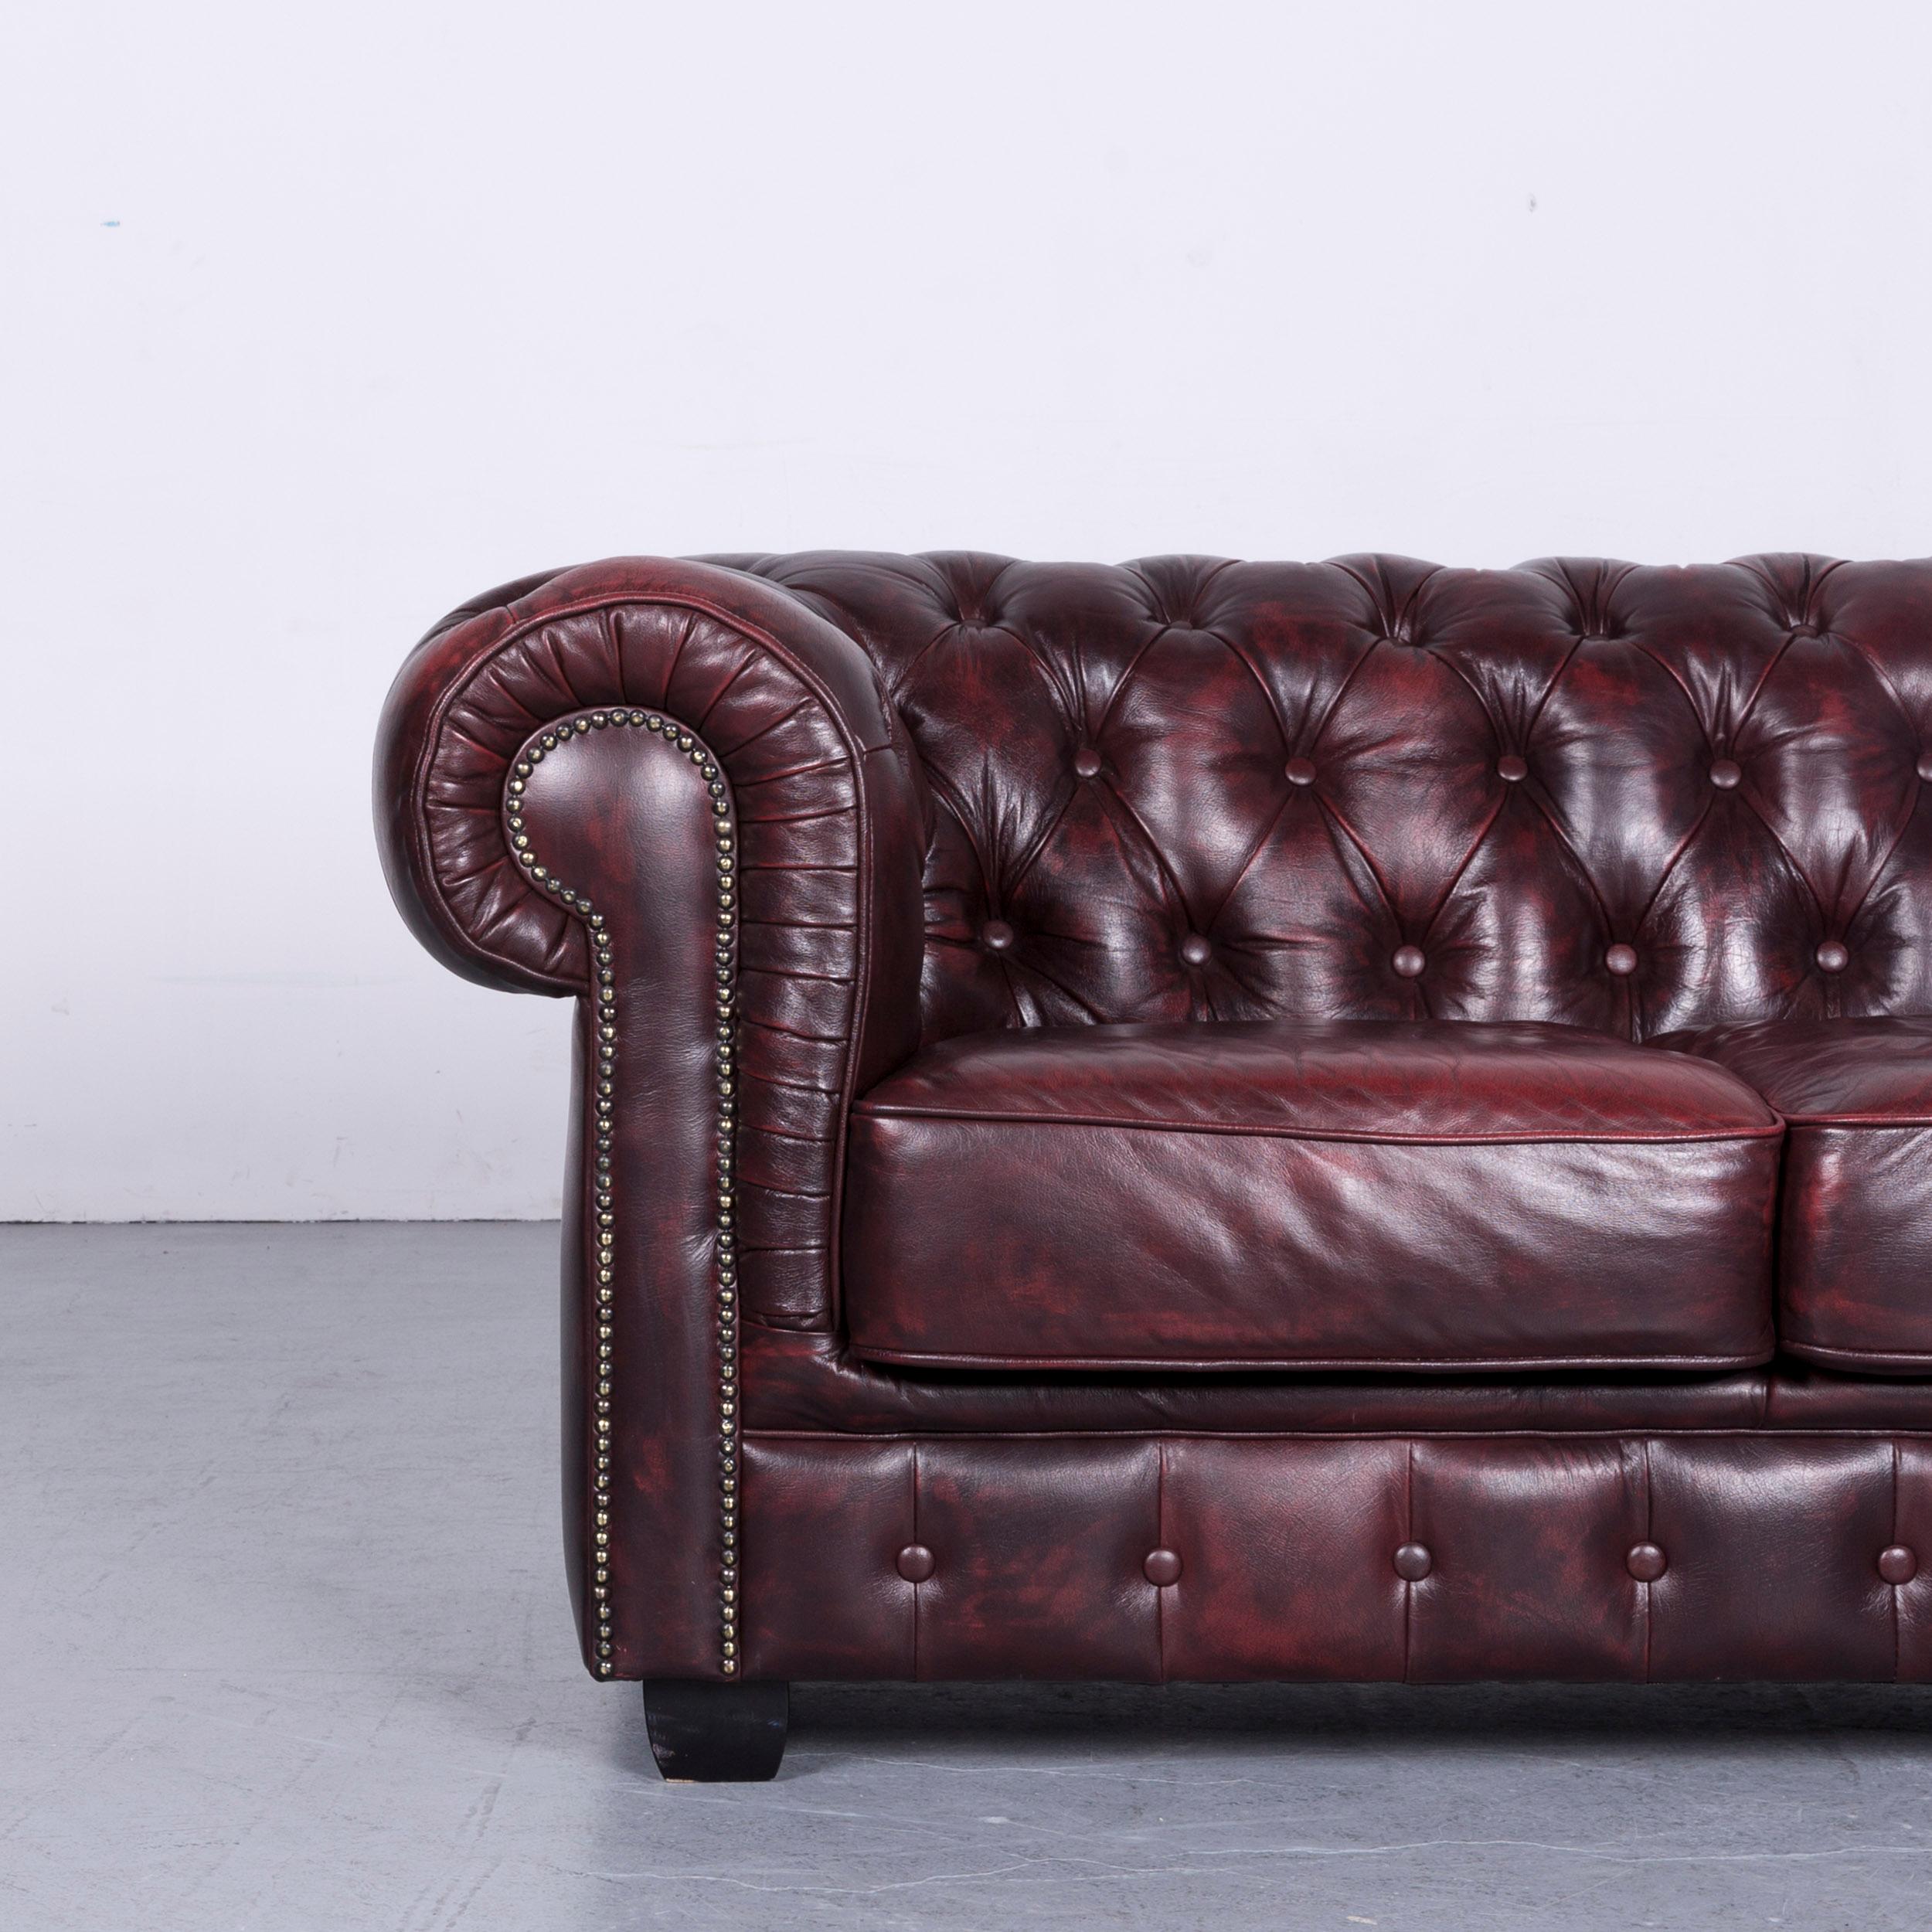 British Chesterfield Leather Sofa Brown Two-Seat Couch Vintage Retro